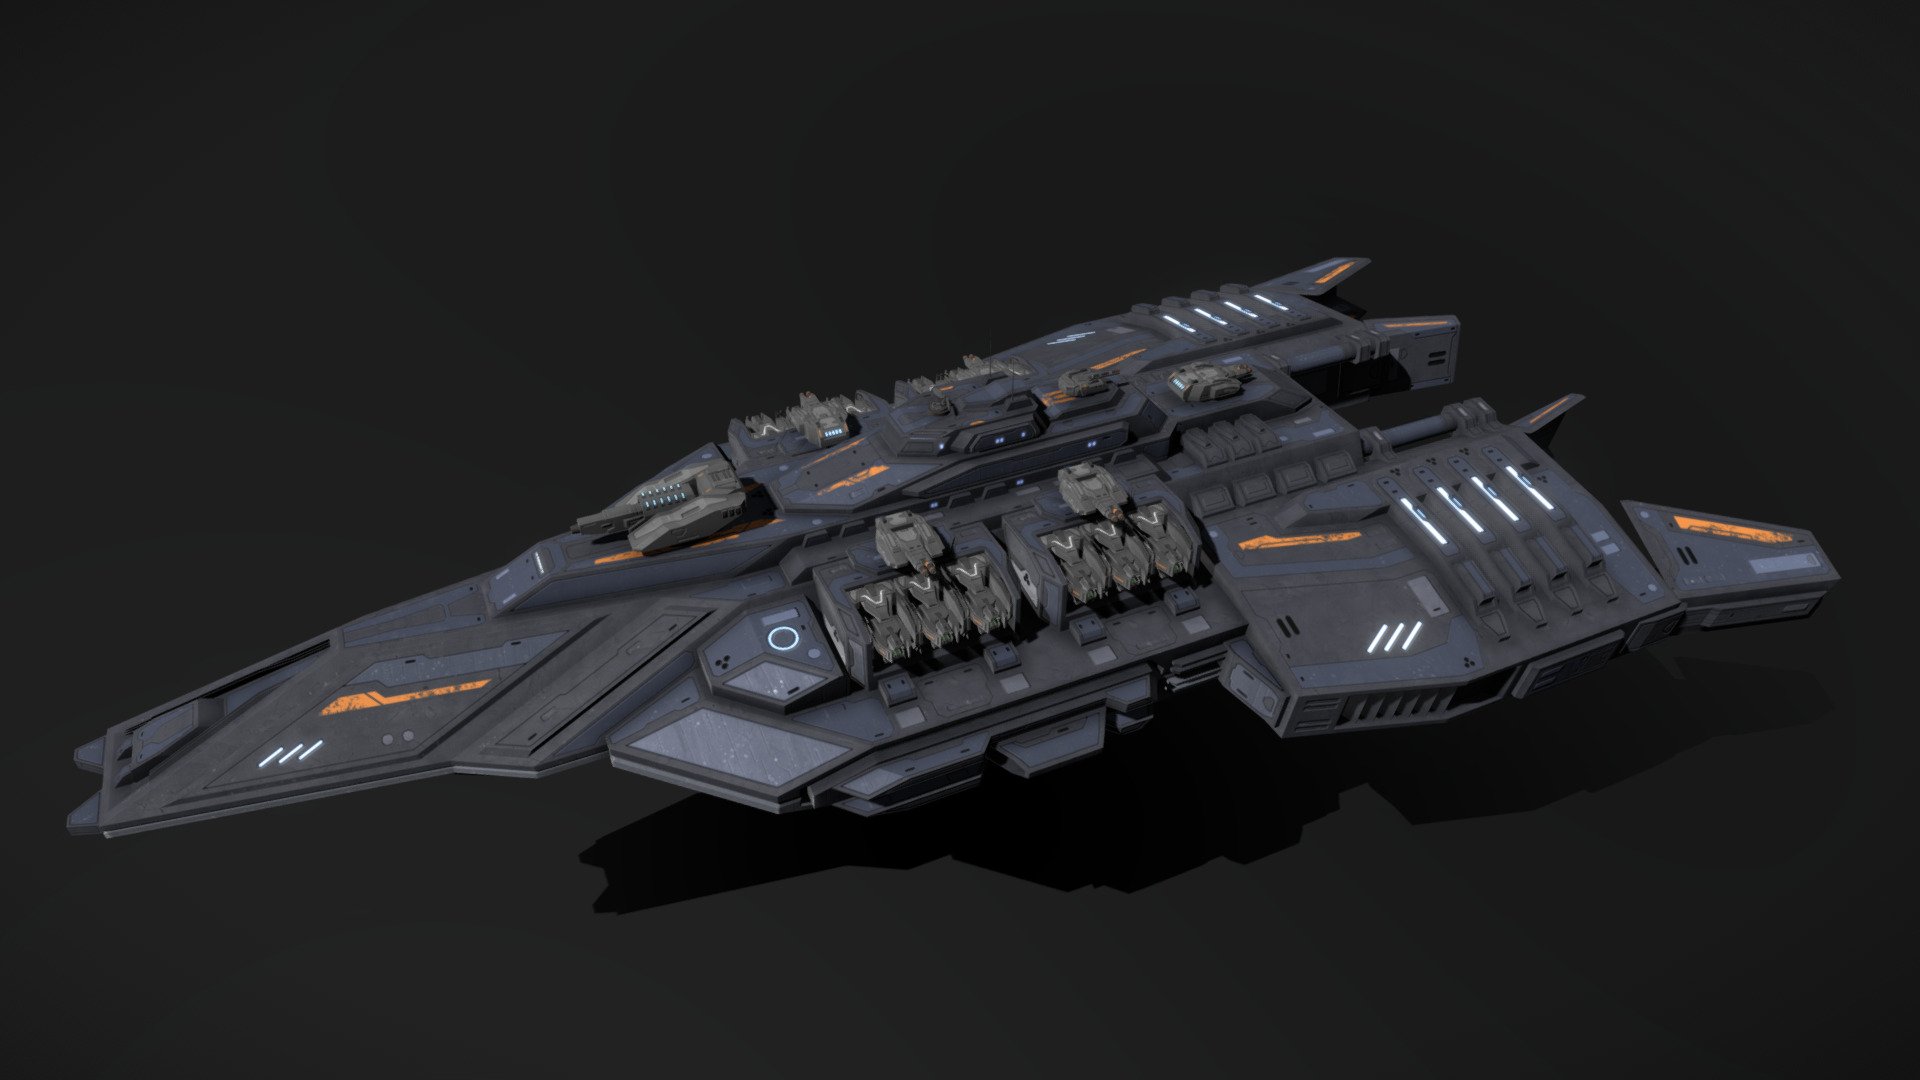 This is a model of a low-poly and game-ready scifi spaceship. 

The weapons are separate meshes and can be animated with a keyframe animation tool. The weapon loadout can be changed as well.

The model comes with several differently colored texture sets. The PSD file with intact layers is included too.

Please note: The textures in the Sketchfab viewer have a reduced resolution to improve Sketchfab loading speed.

If you have bought this model please make sure to download the “additional file”.  It contains FBX and OBJ meshes, full resolution textures and the source PSDs with intact layers. The meshes are separate and can be animated (e.g. firing animations for gun barrels, rotating turrets, etc) 3d model